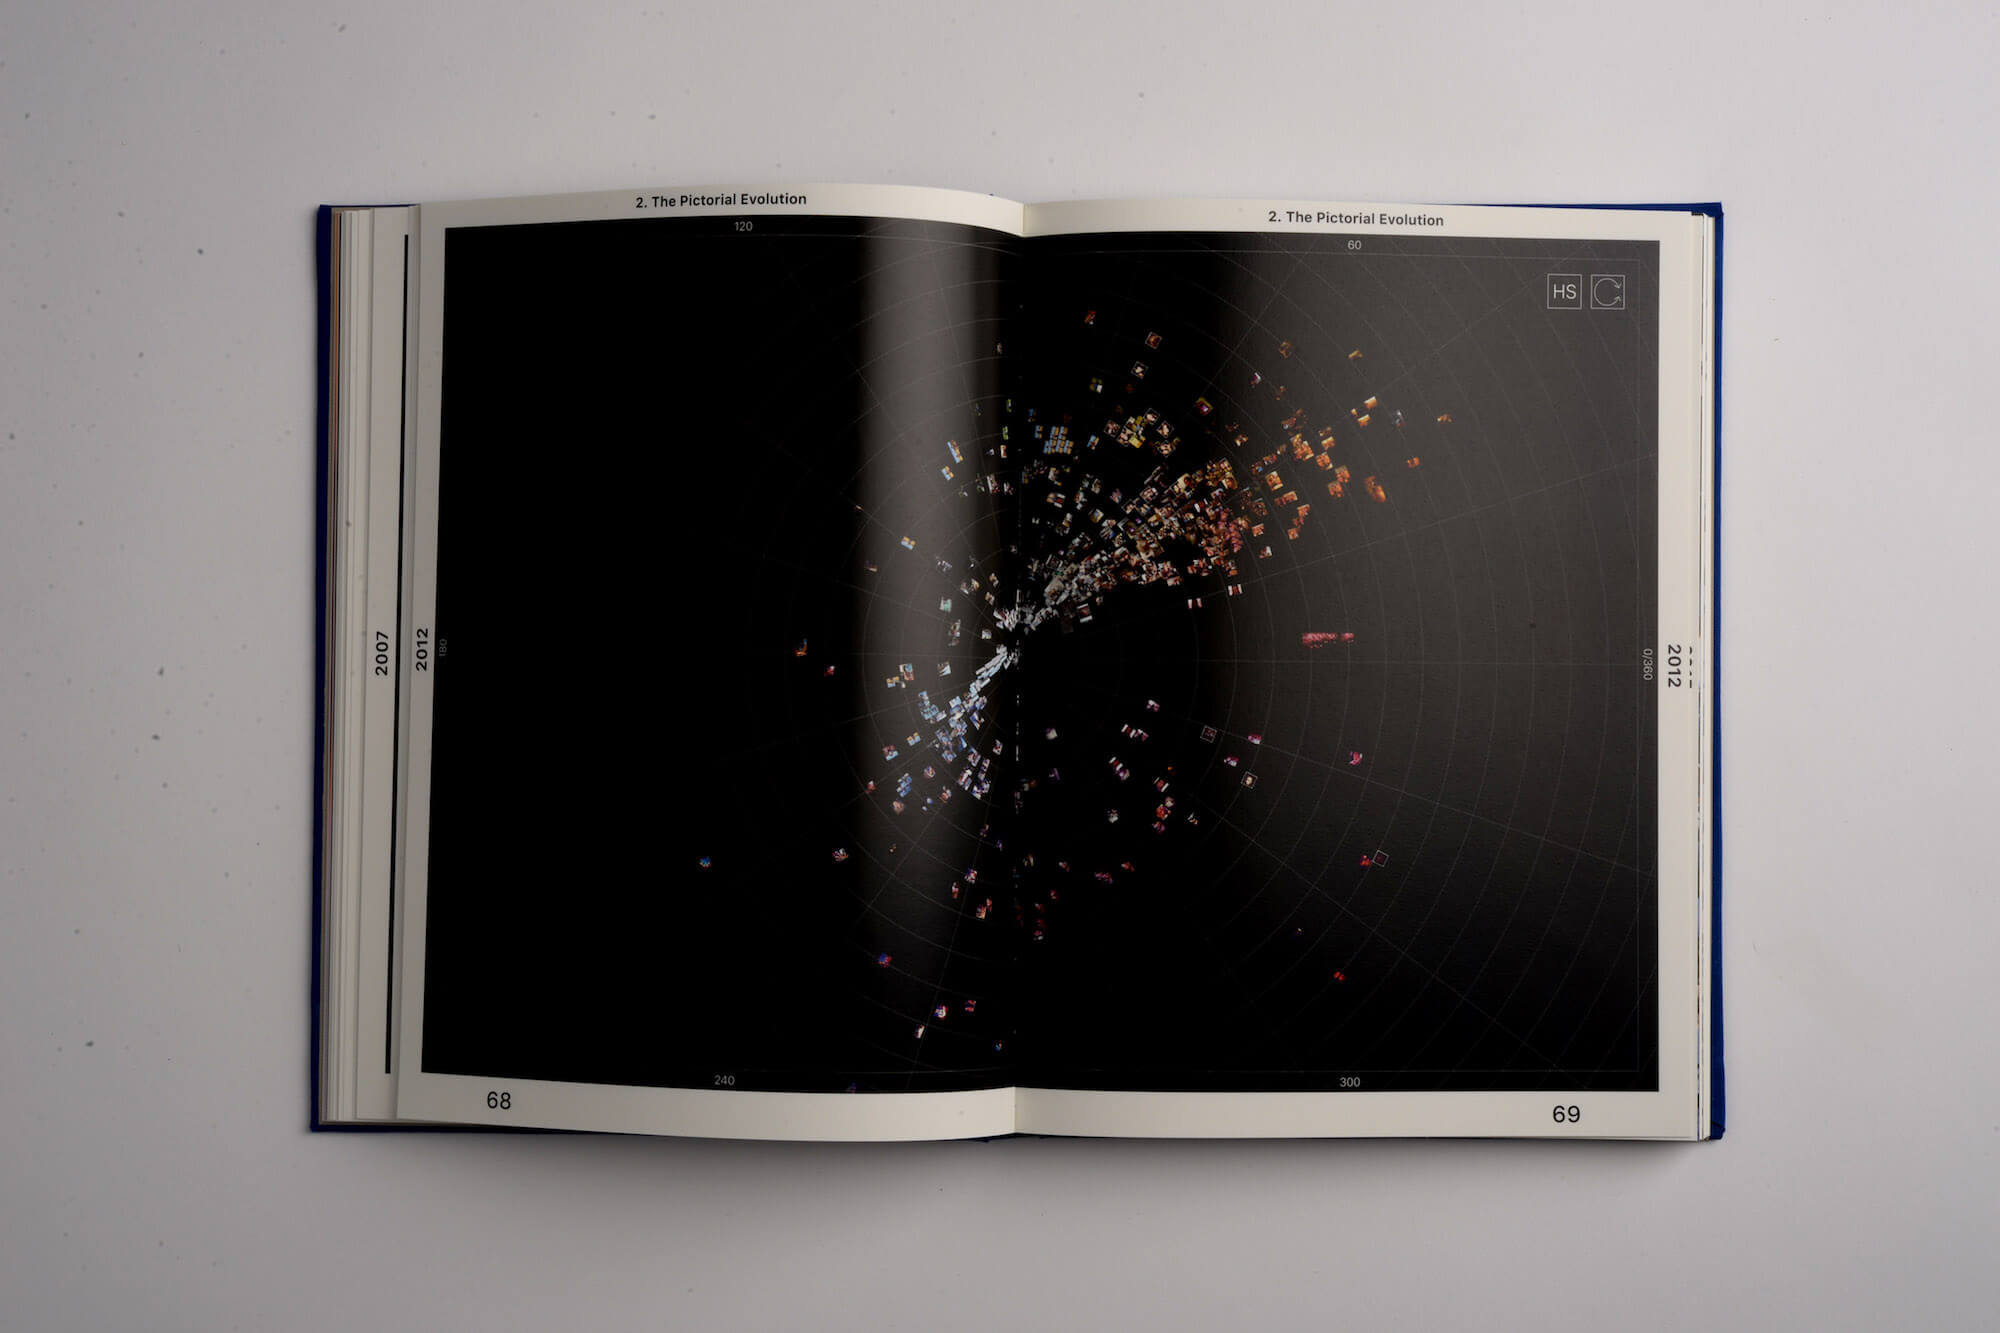 Open book showing more of the images the dots represent